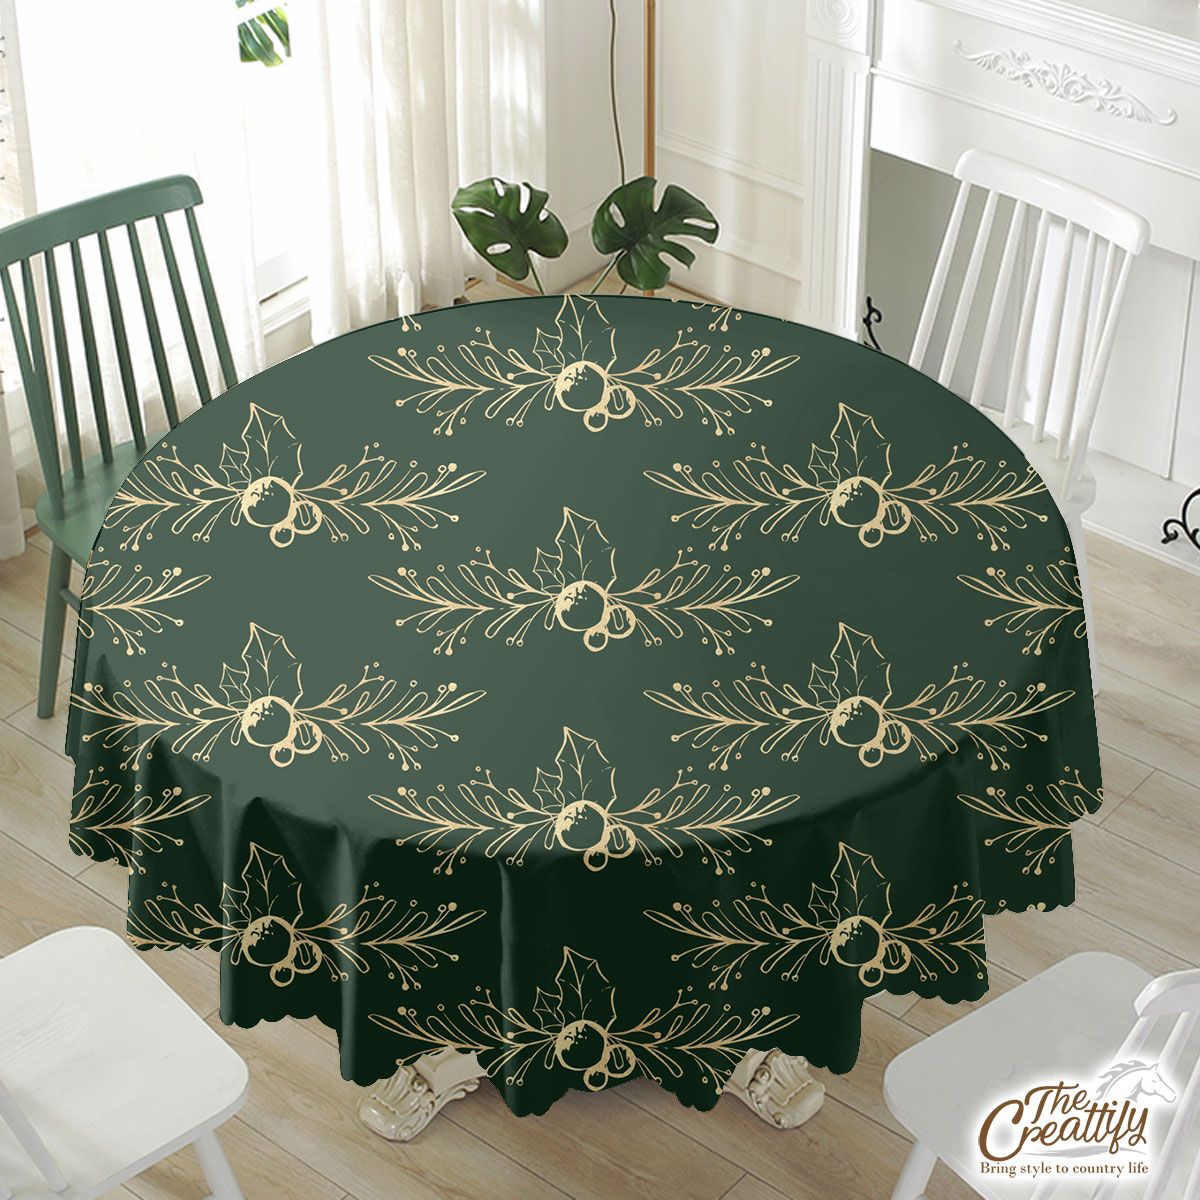 Gold And Green Holly Branch Waterproof Tablecloth